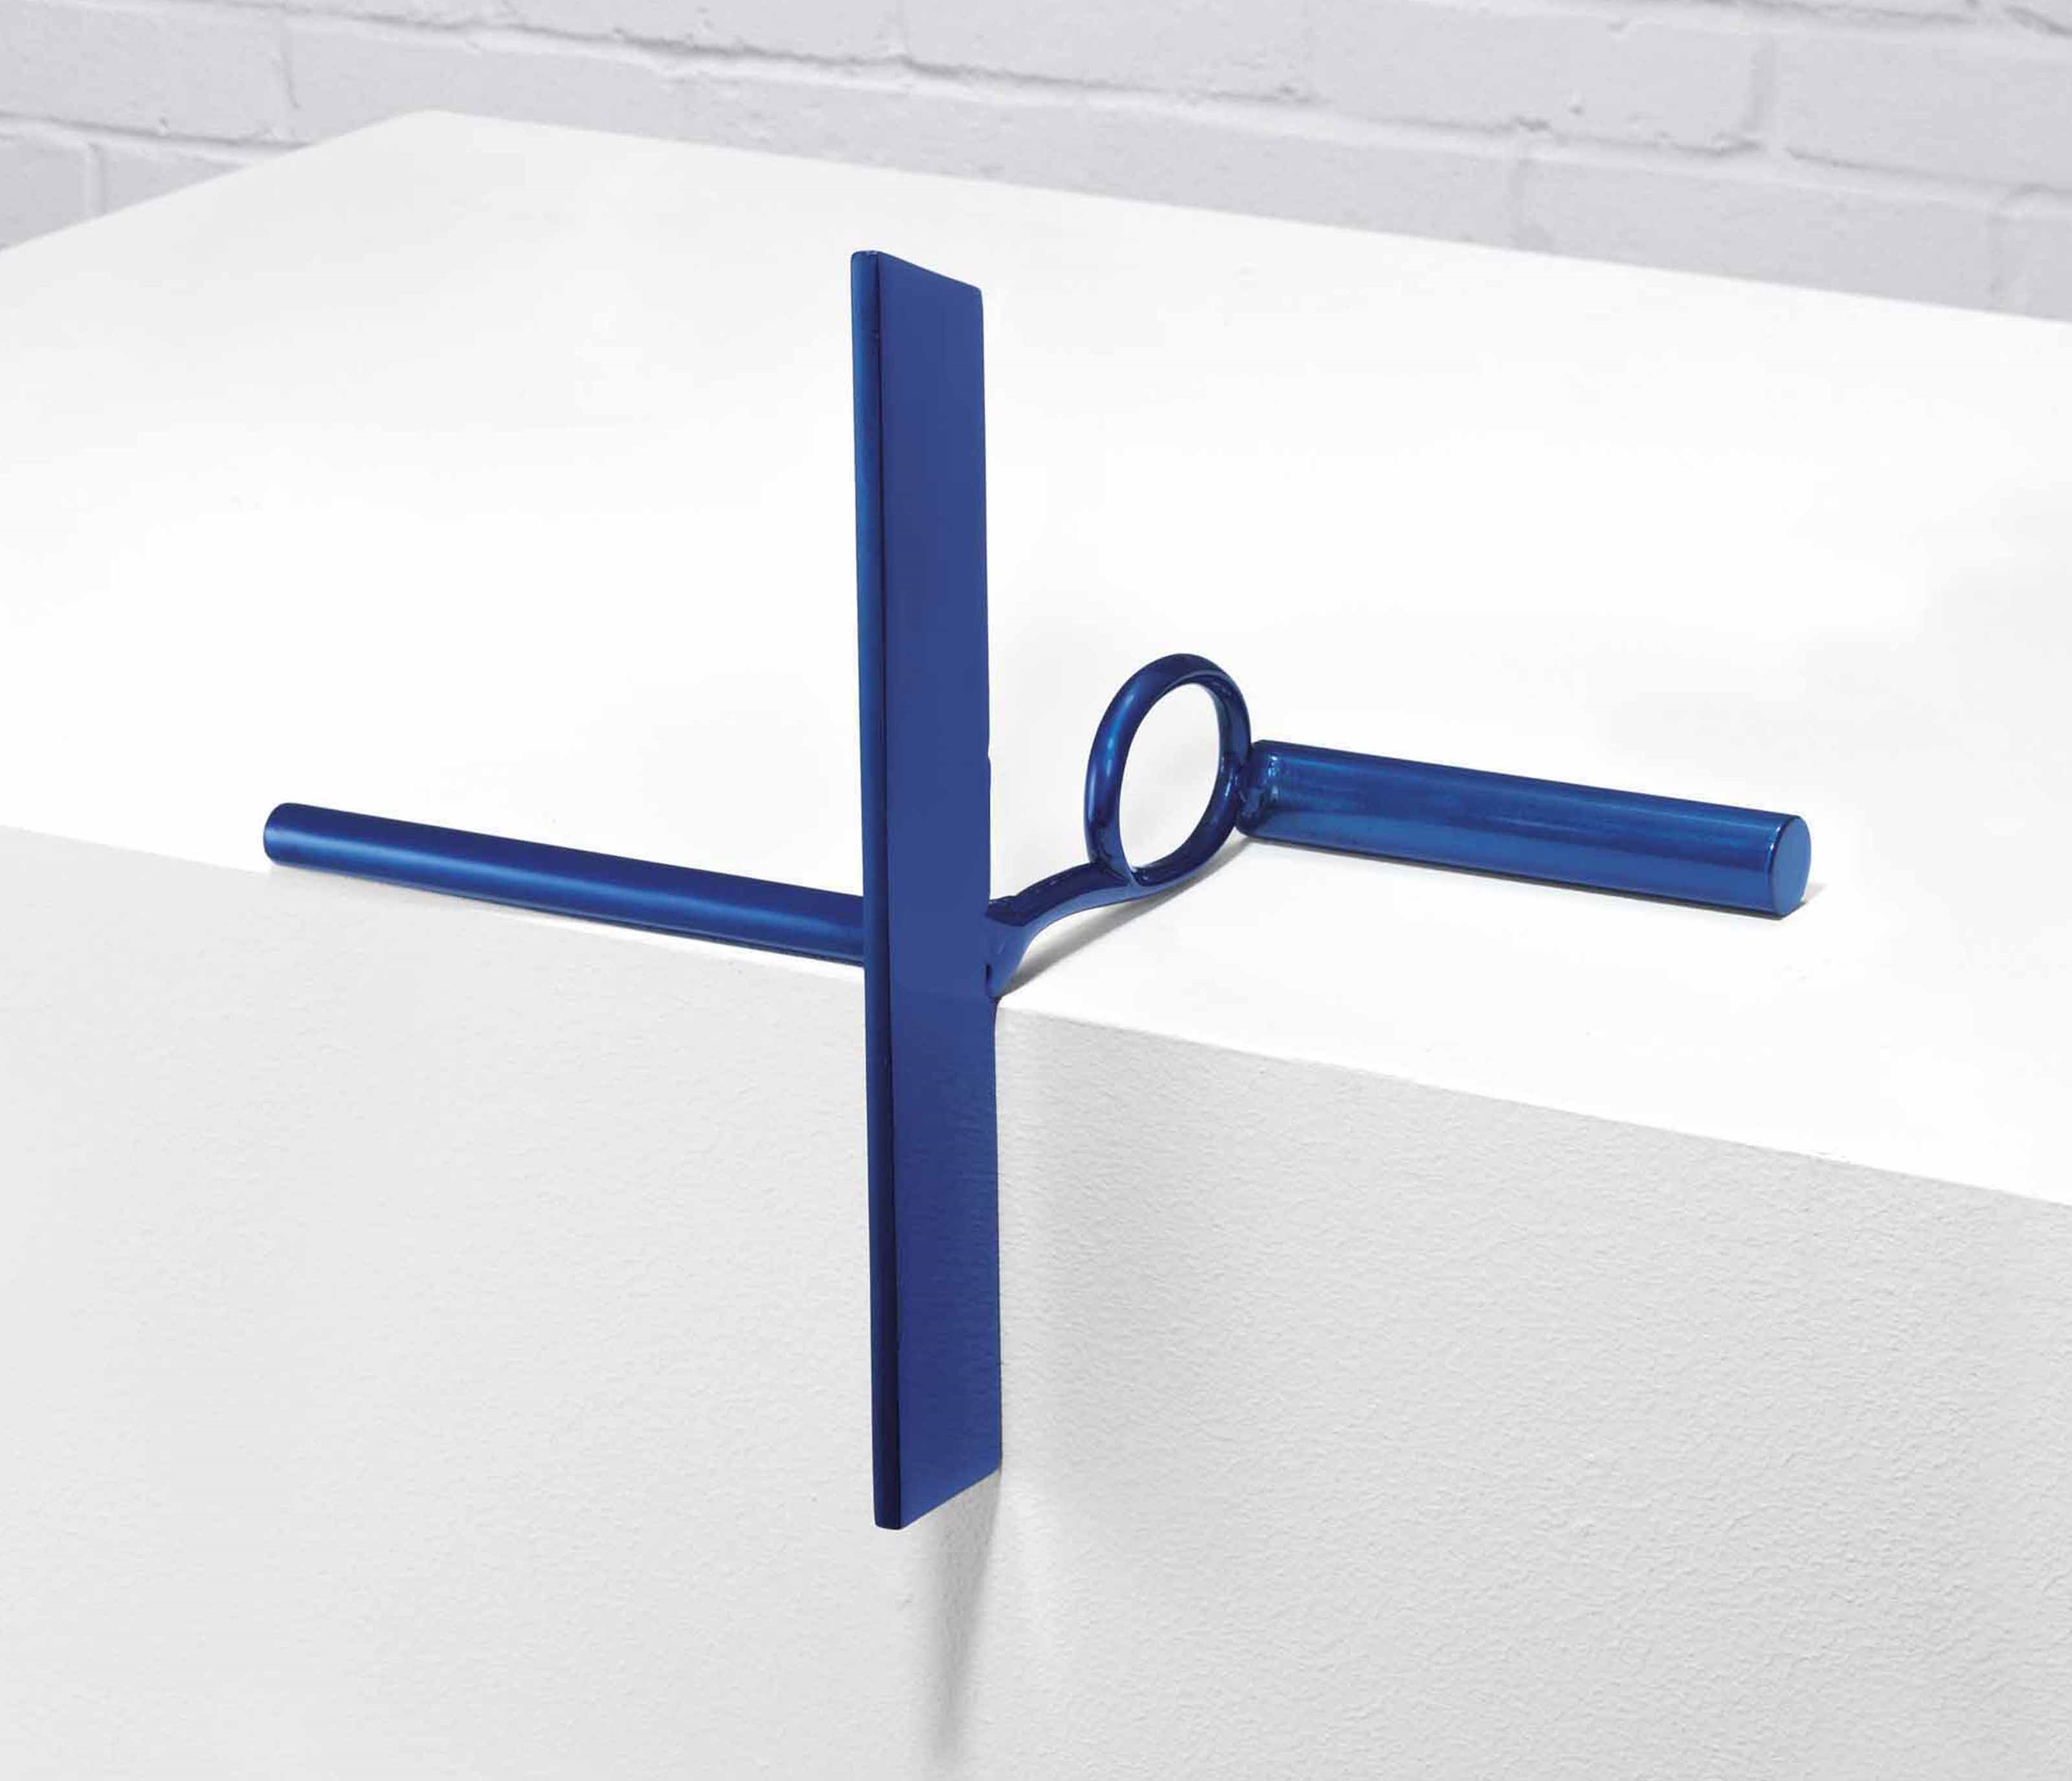 Artwork by Anthony Caro, Table Piece V, Made of lacquered blue paint over polished steel